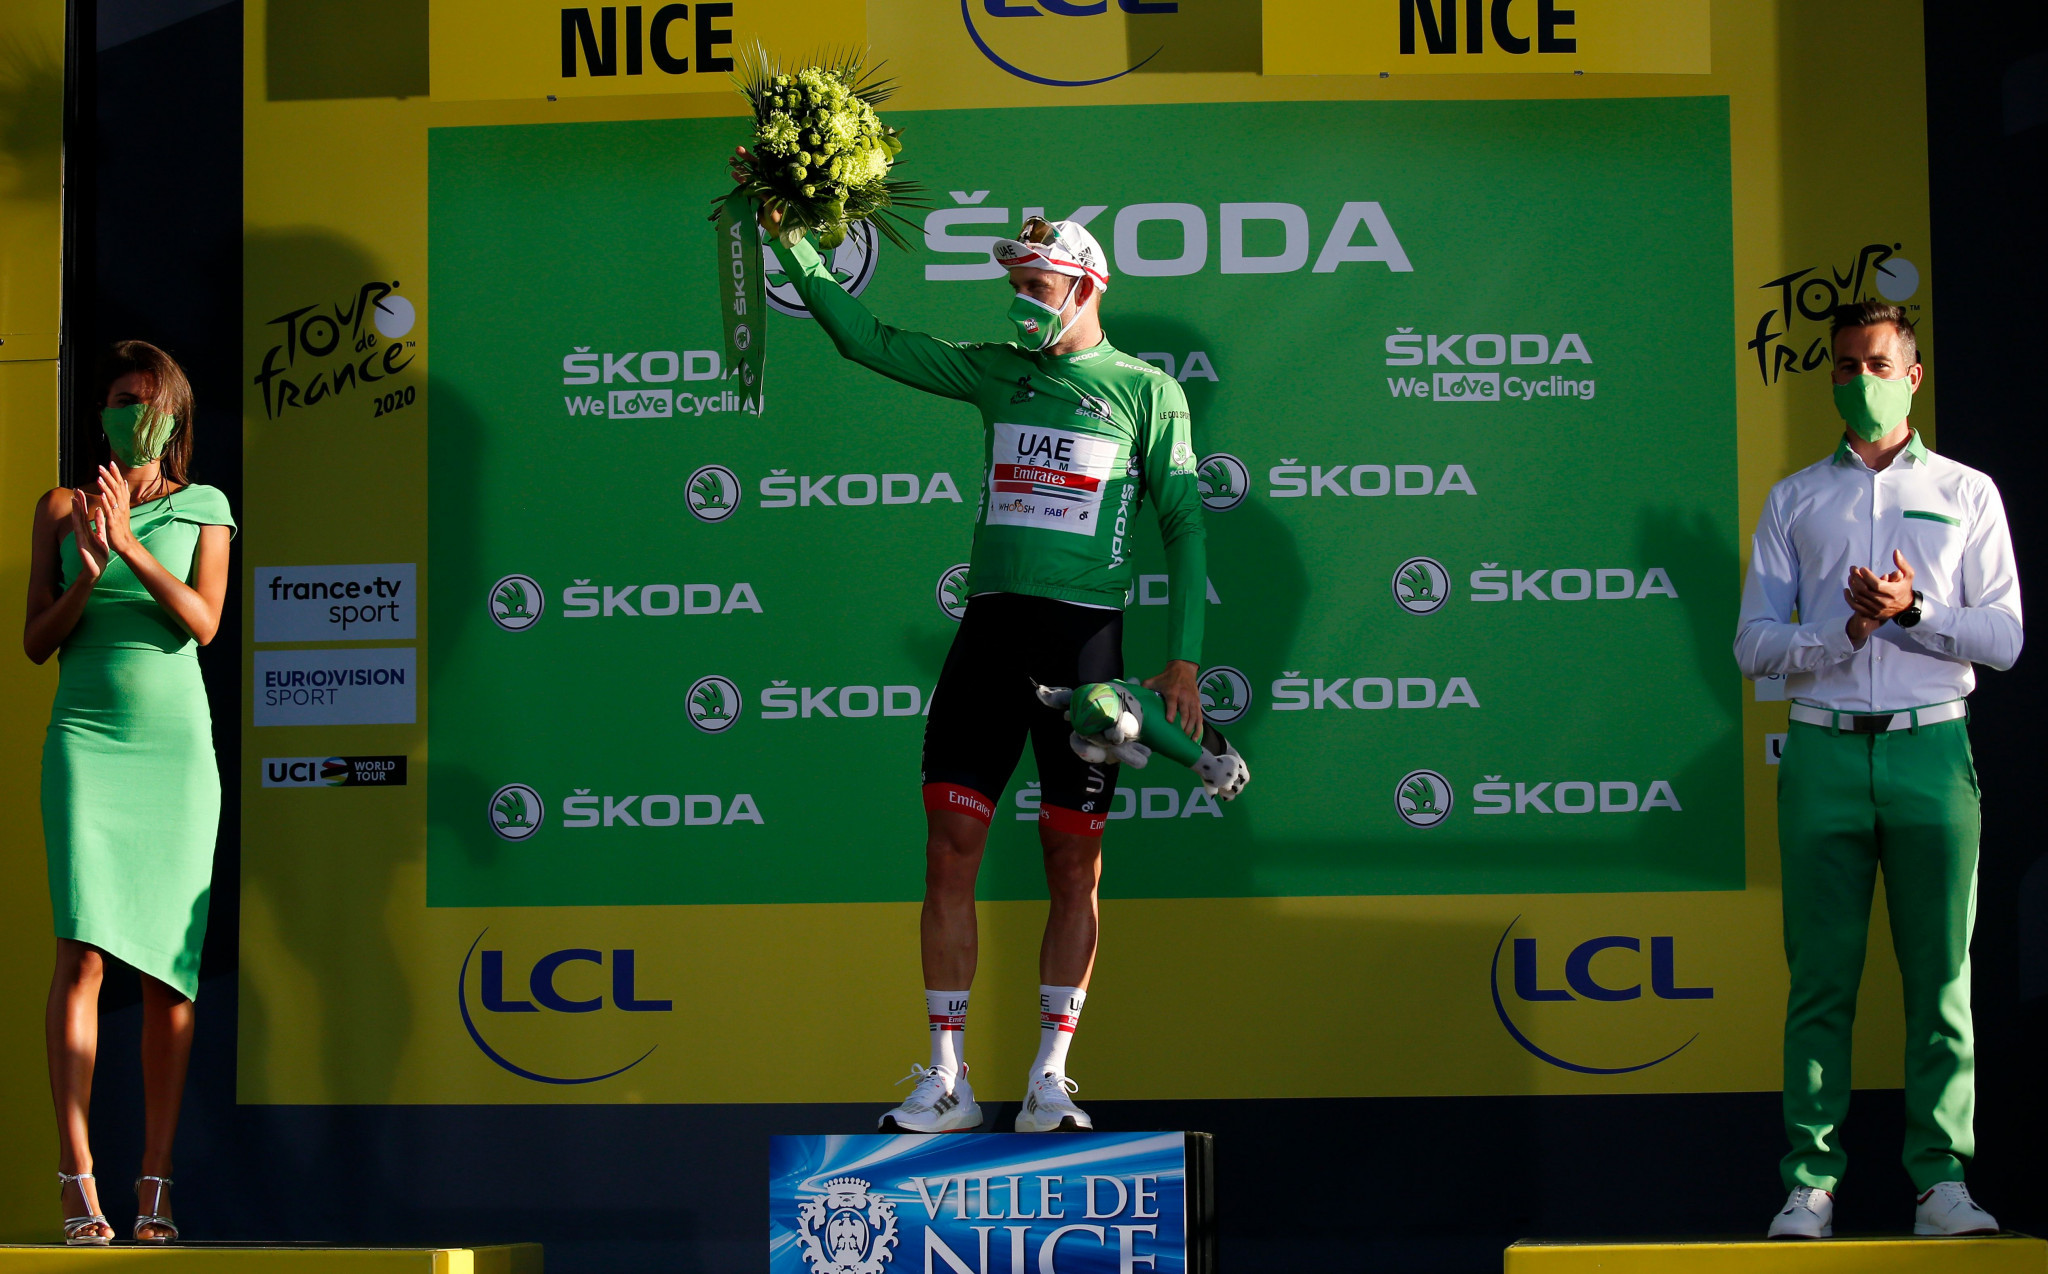 Alexander Kristoff lost the yellow jersey, but retained the green jersey, as he continues to sit top of the points standings ©Getty Images